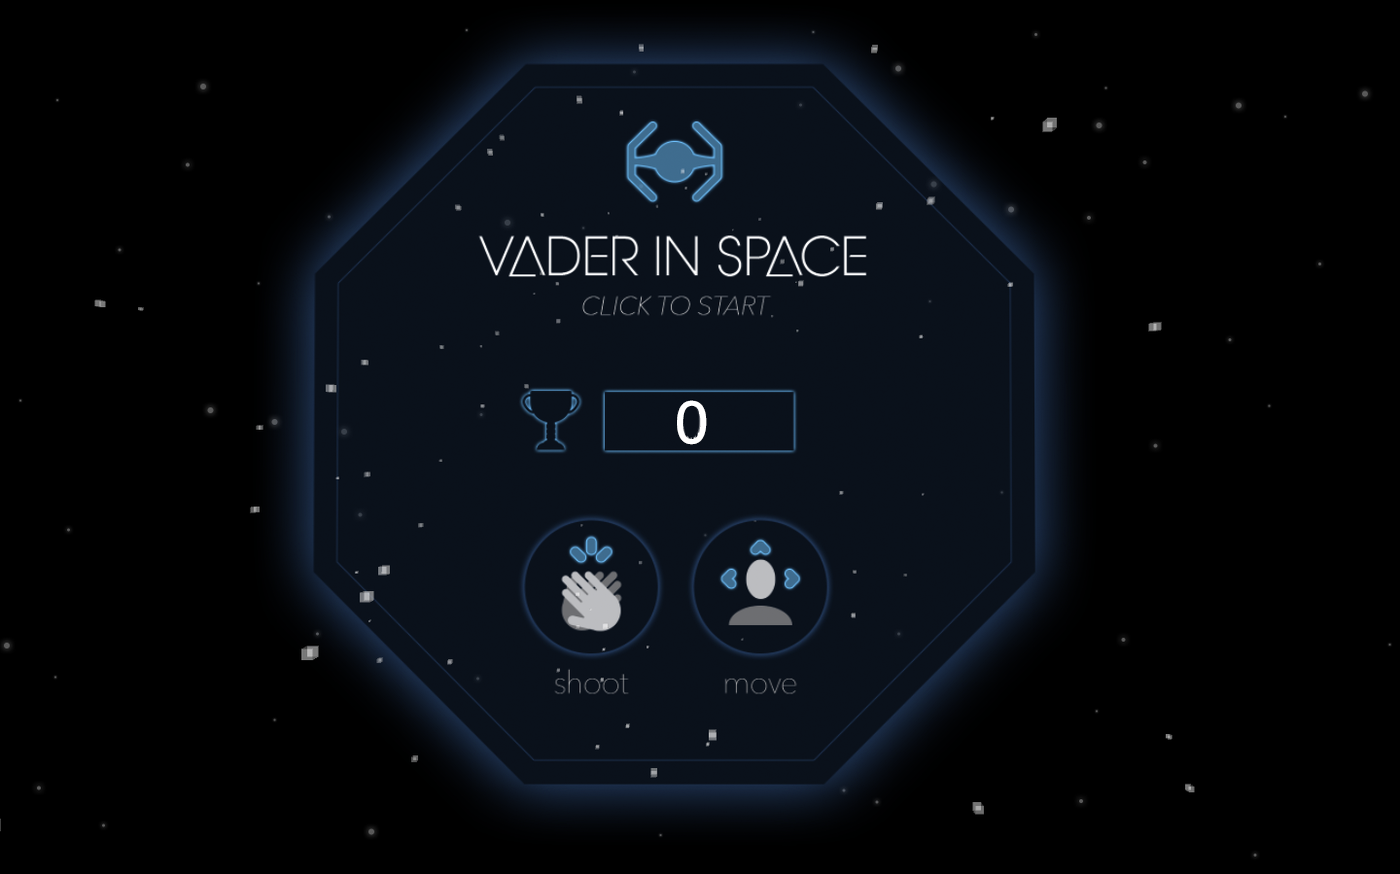 vader_in_space_2